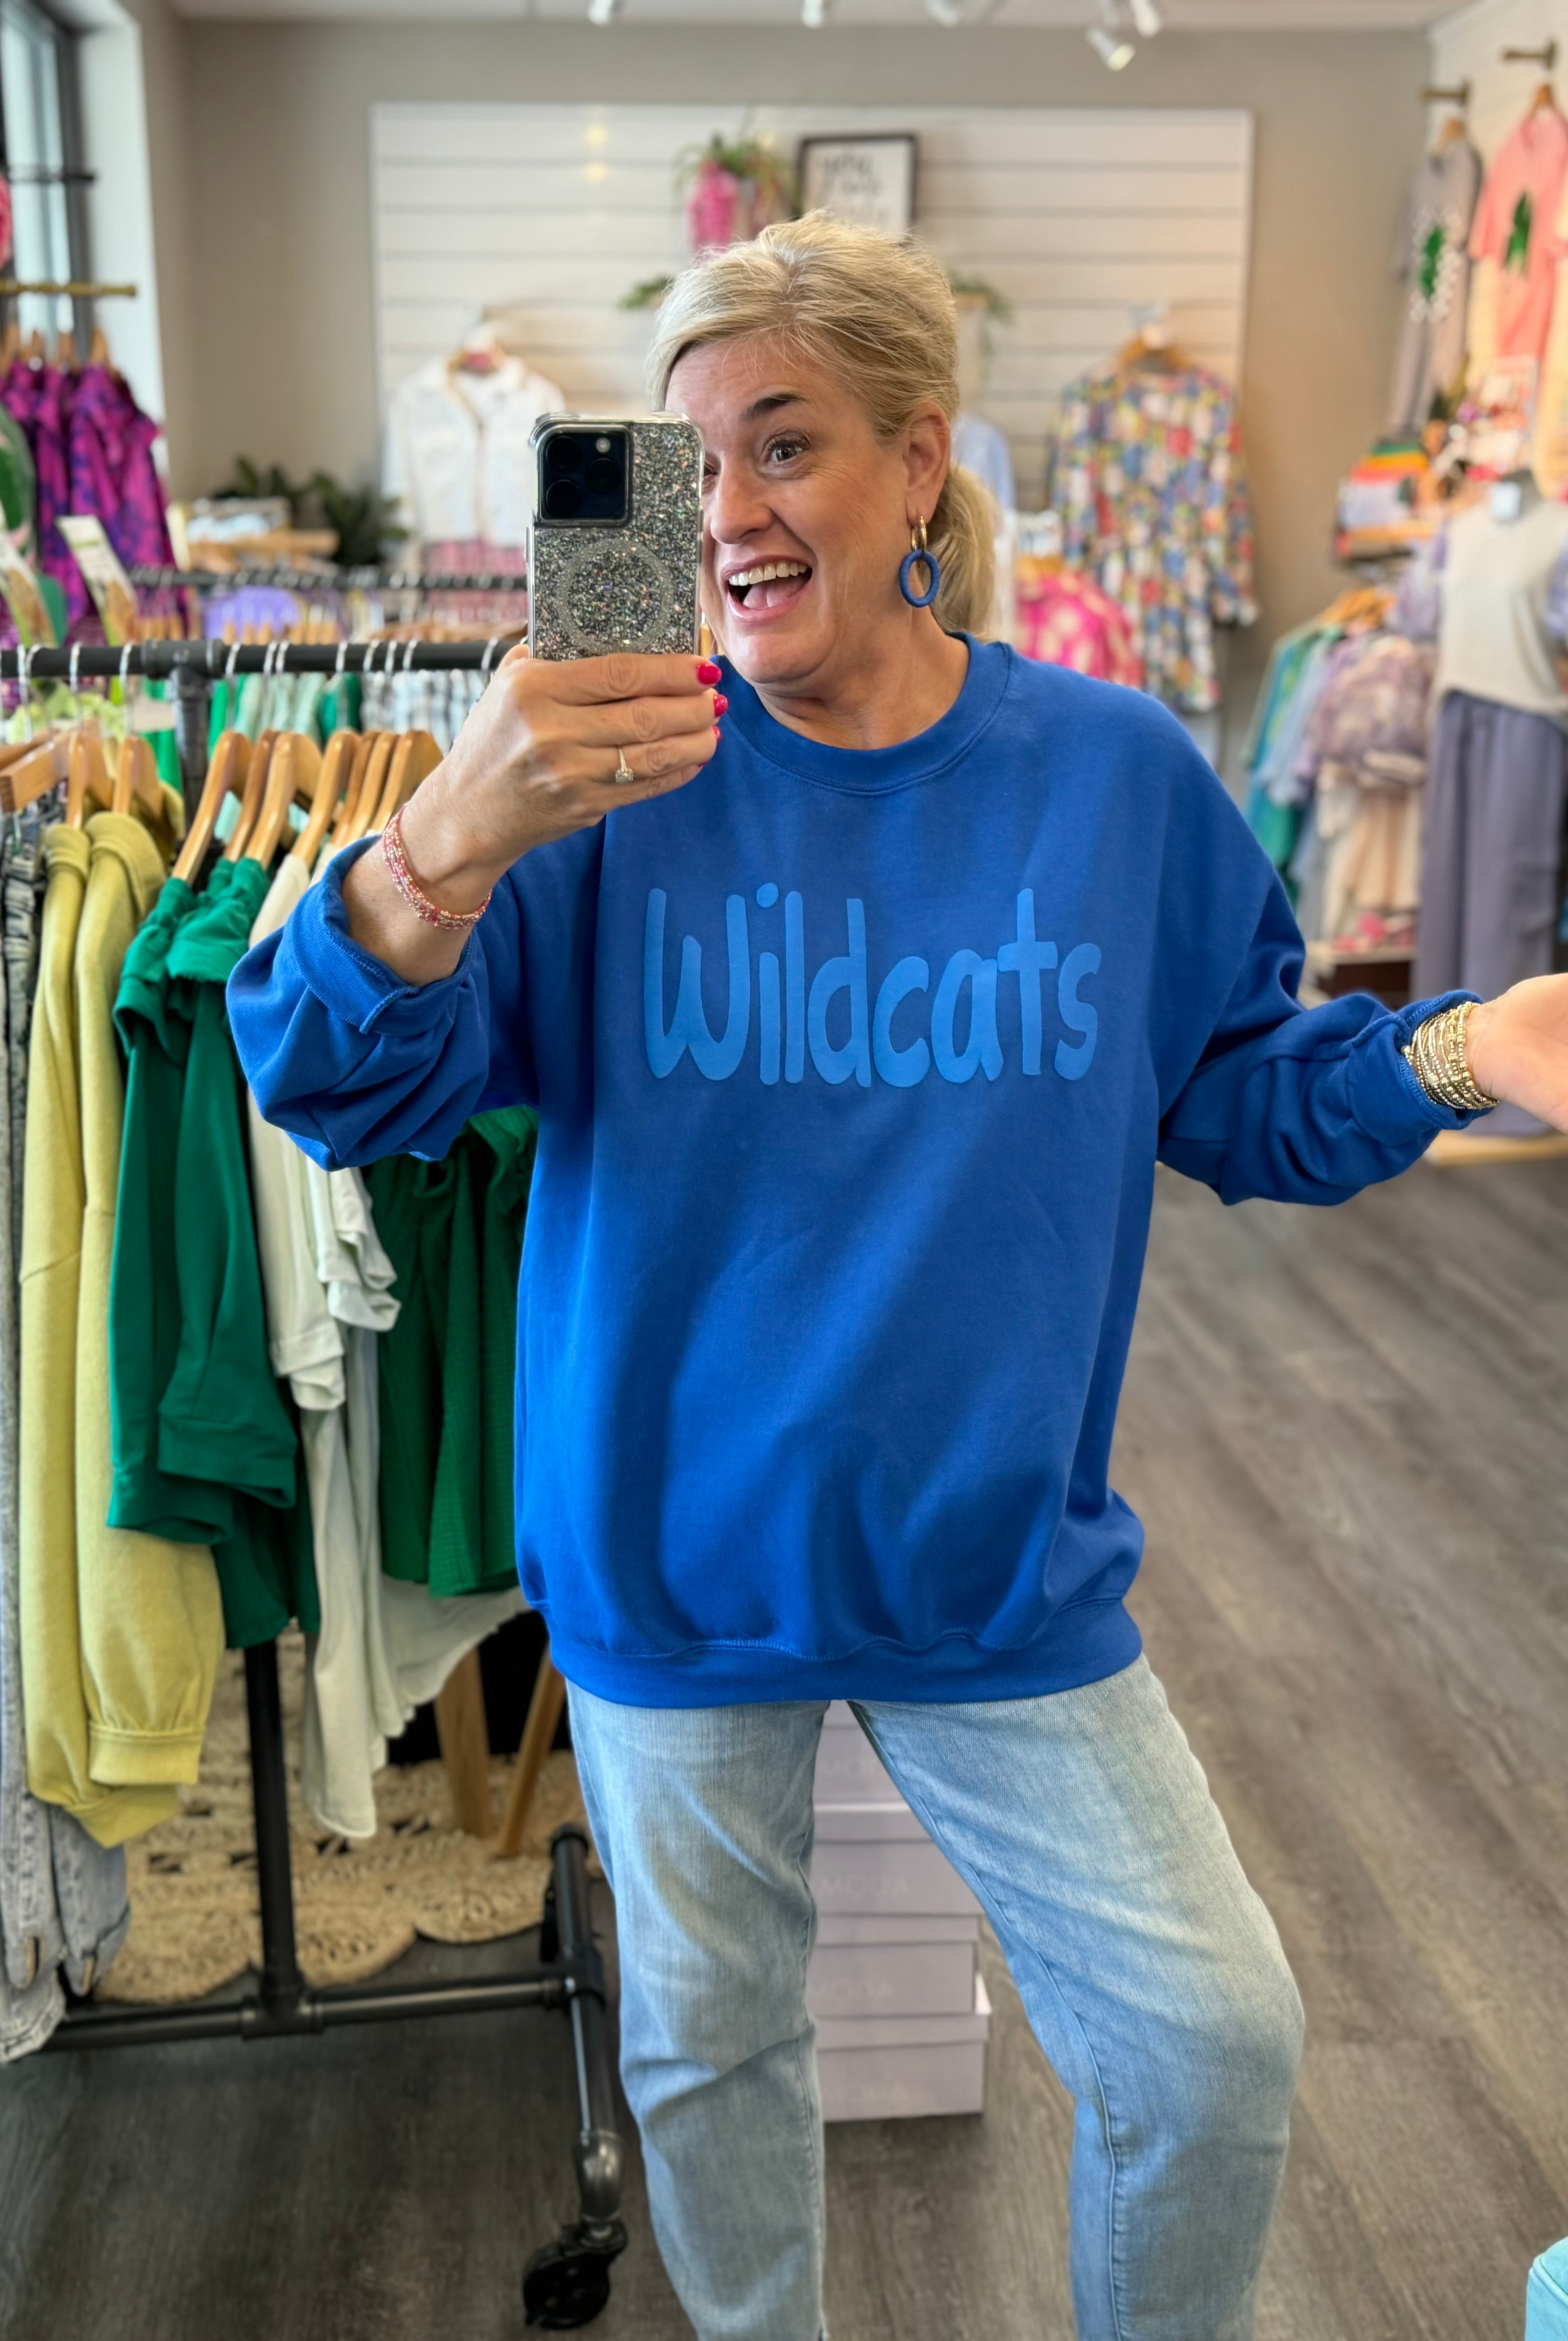 Deal of the Day Wildcats Crewneck-Tops-The Lovely Closet-The Lovely Closet, Women's Fashion Boutique in Alexandria, KY